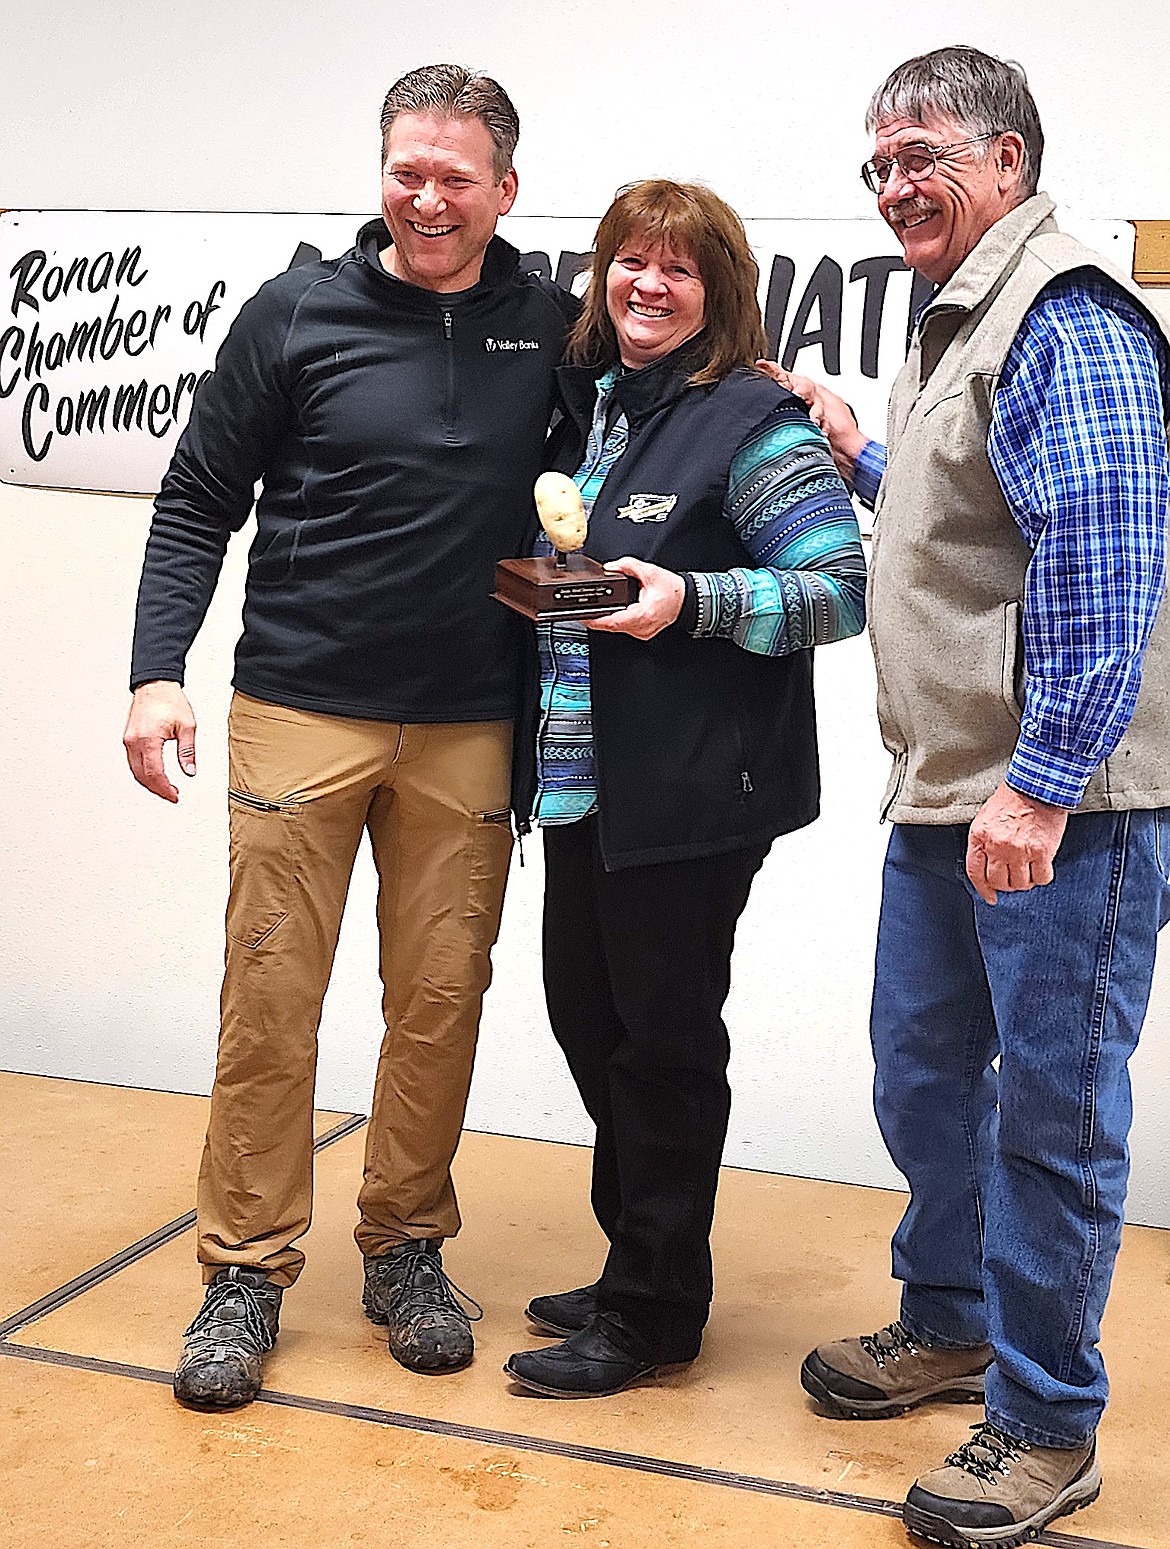 Jamie Buhr, Ronan Chamber of Commerce committee members, stands with Susan and Jack Lake, lifetime Montana farmers, who were honored at the Ag Appreciation event on March 29 at the community center. (Berl Tiskus/Leader)